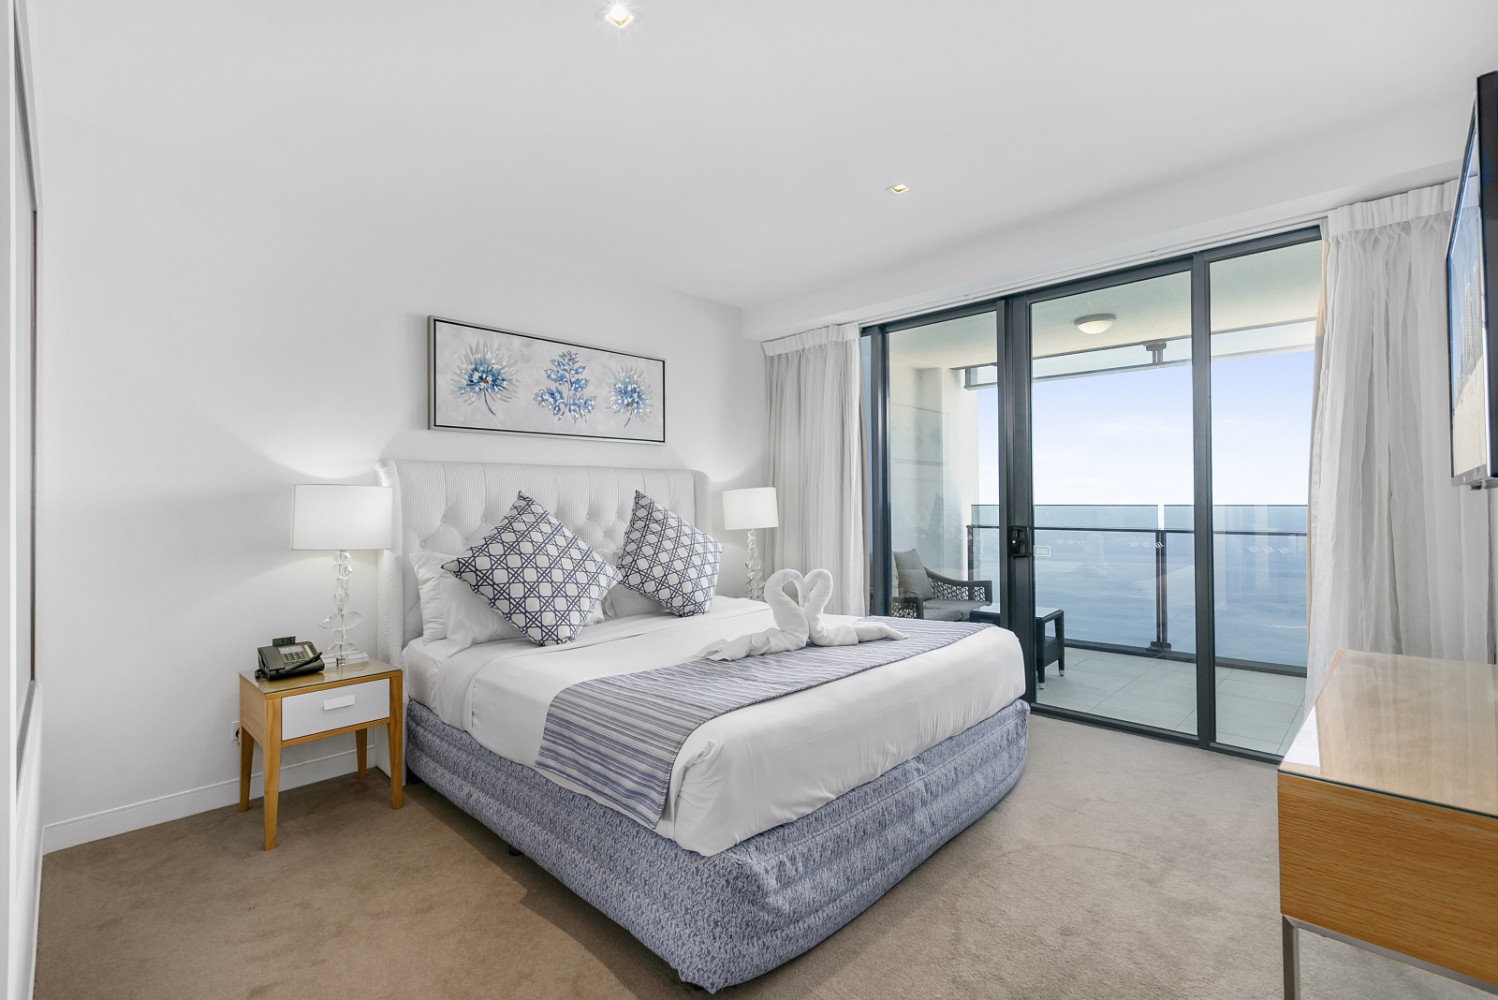 Master Bedroom with balcony and ocean views